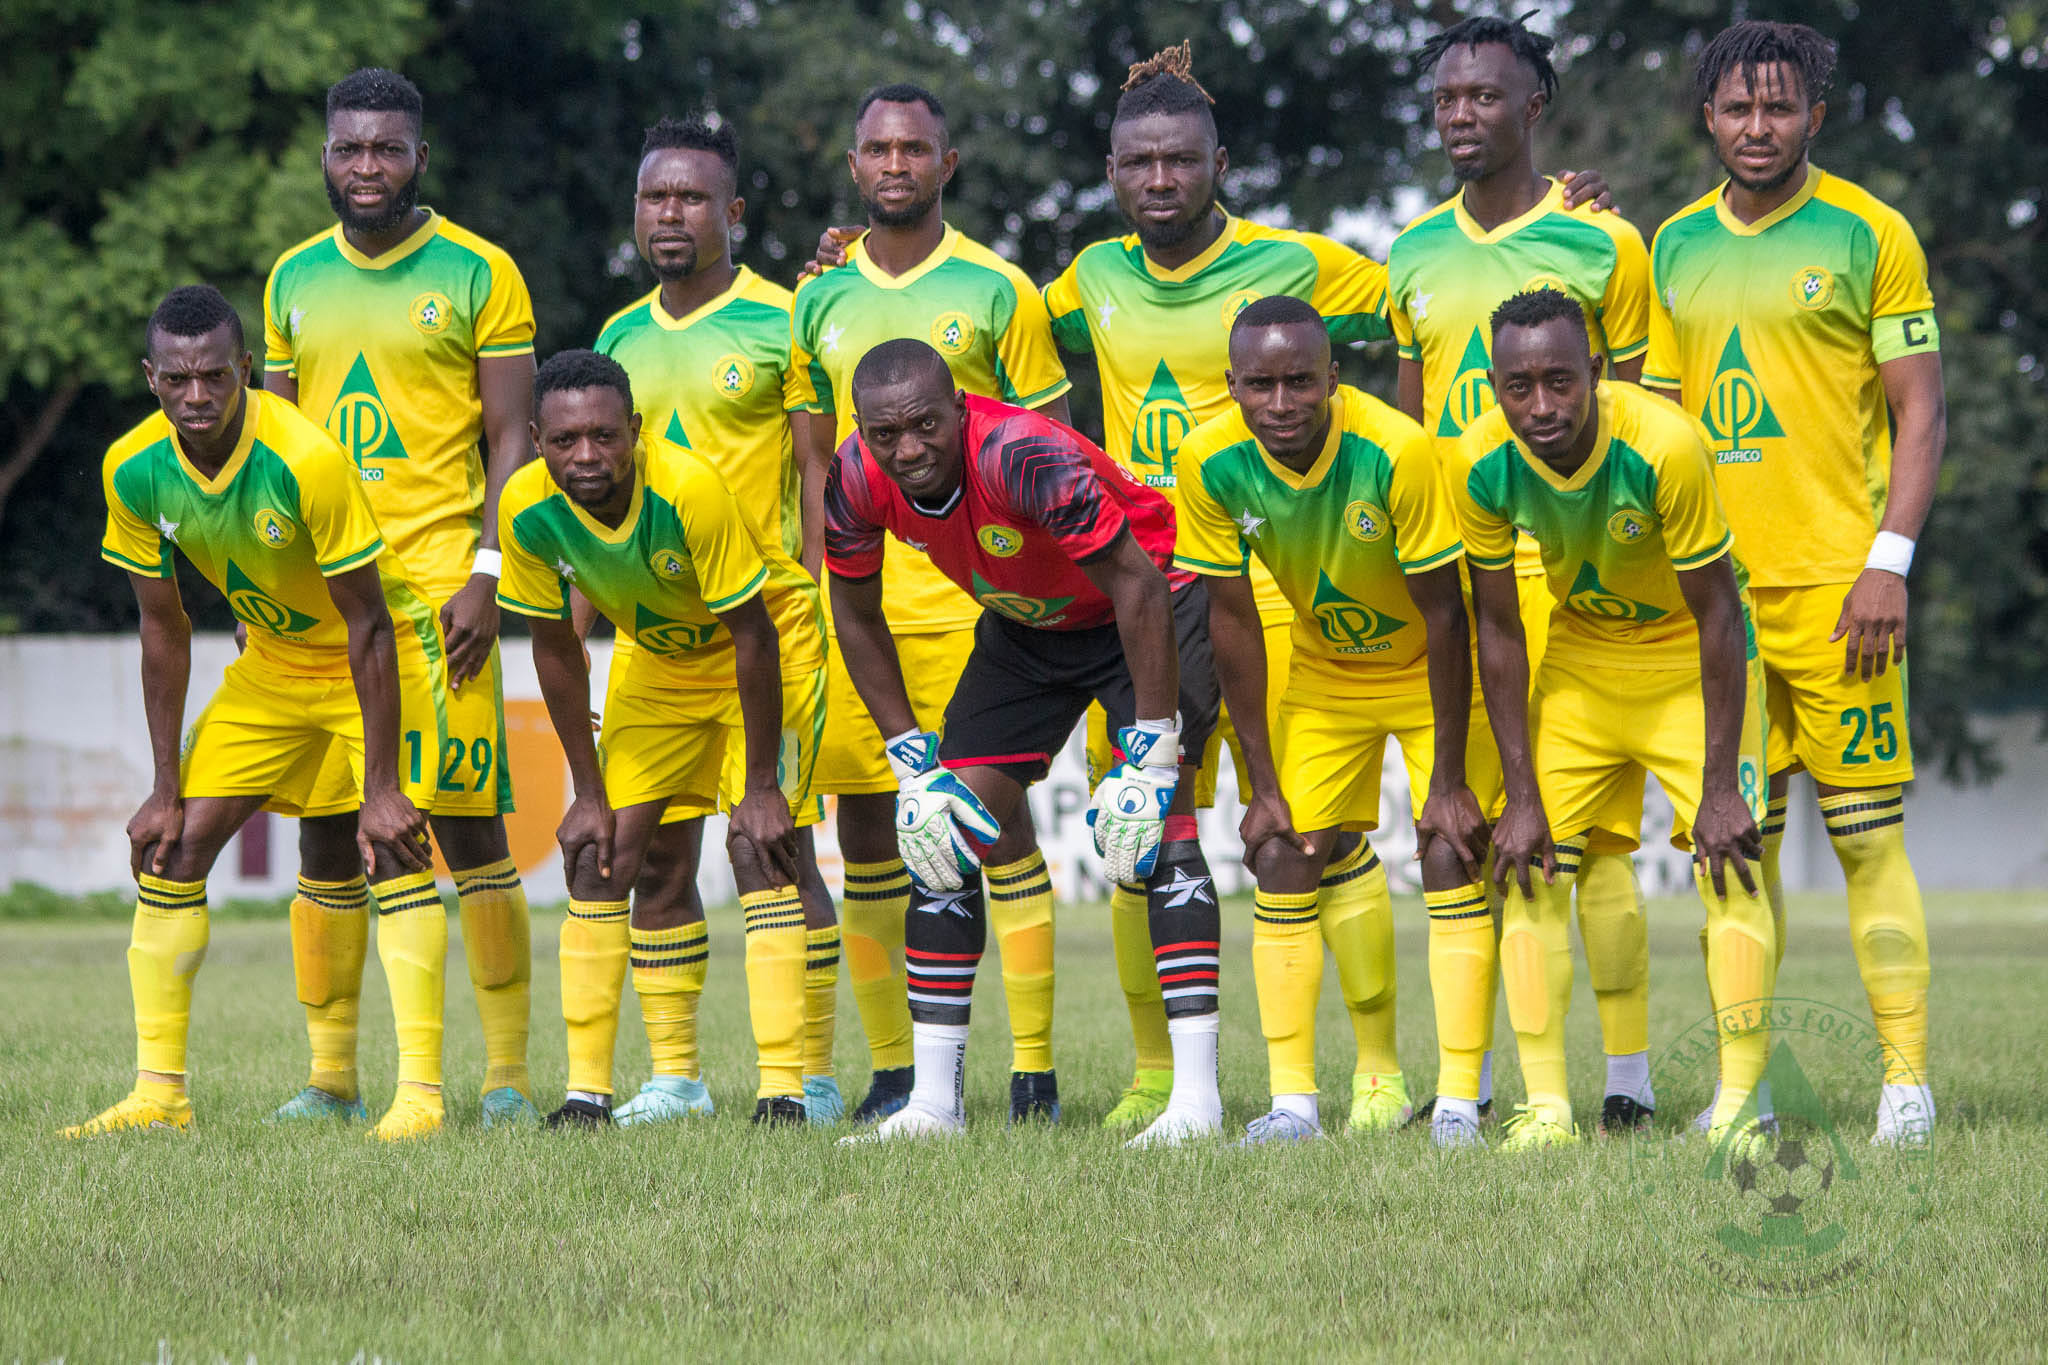 Forest Rangers FC announces roster shake-up, releases five players